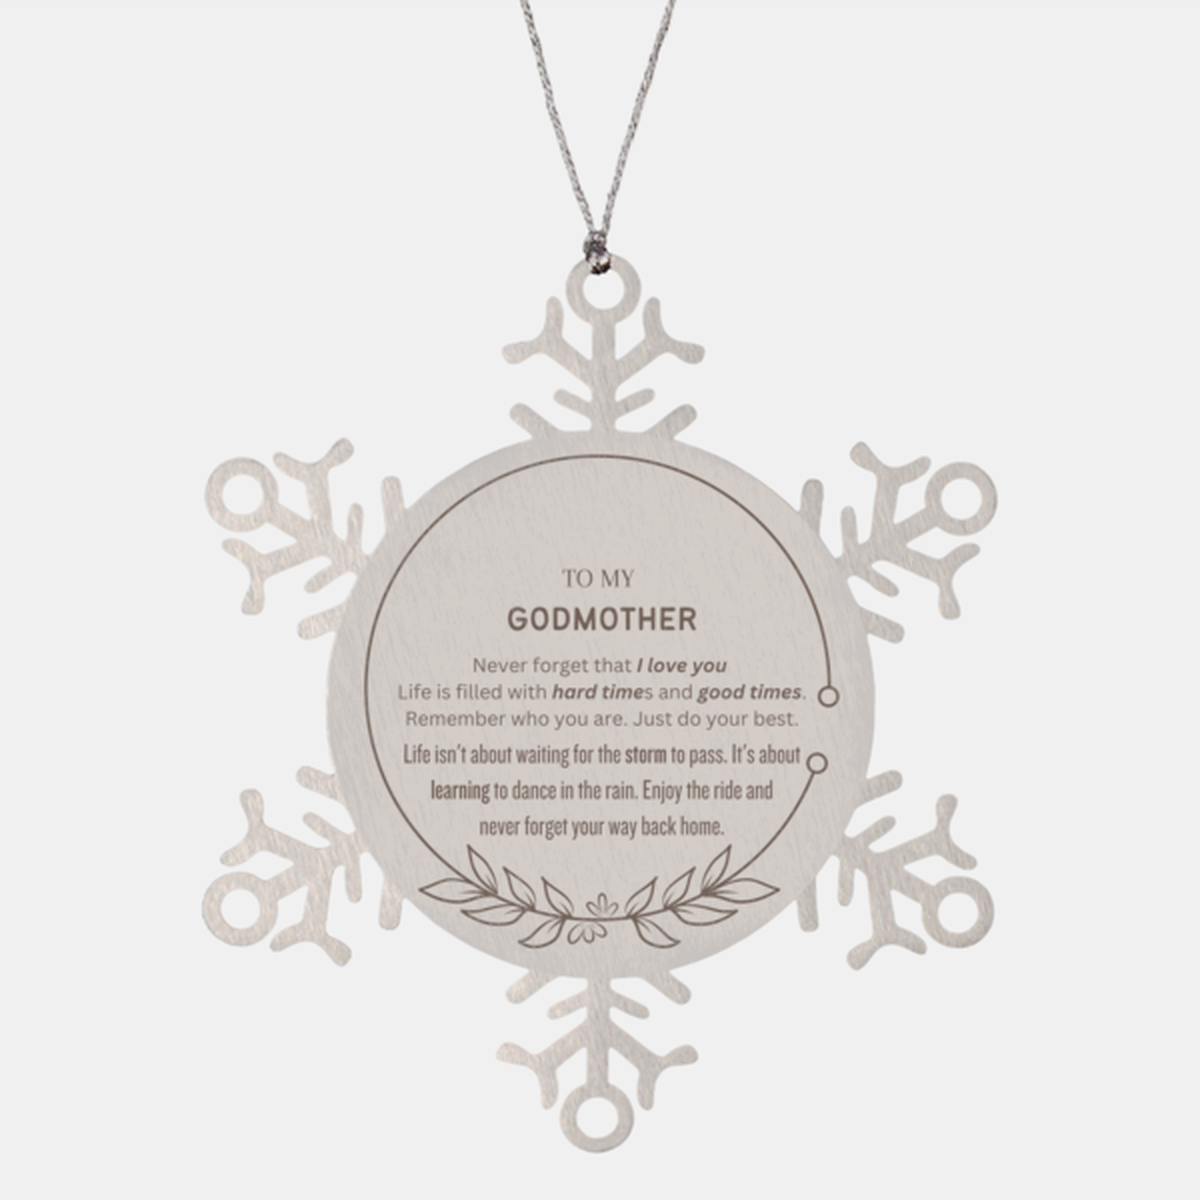 Christmas Godmother Snowflake Ornament Gifts, To My Godmother Thank You Gifts For Godmother, Xmas Decorations Unique Gifts For Godmother To My Godmother Never forget that I love you life is filled with hard times and good times. Remember who you are. Just